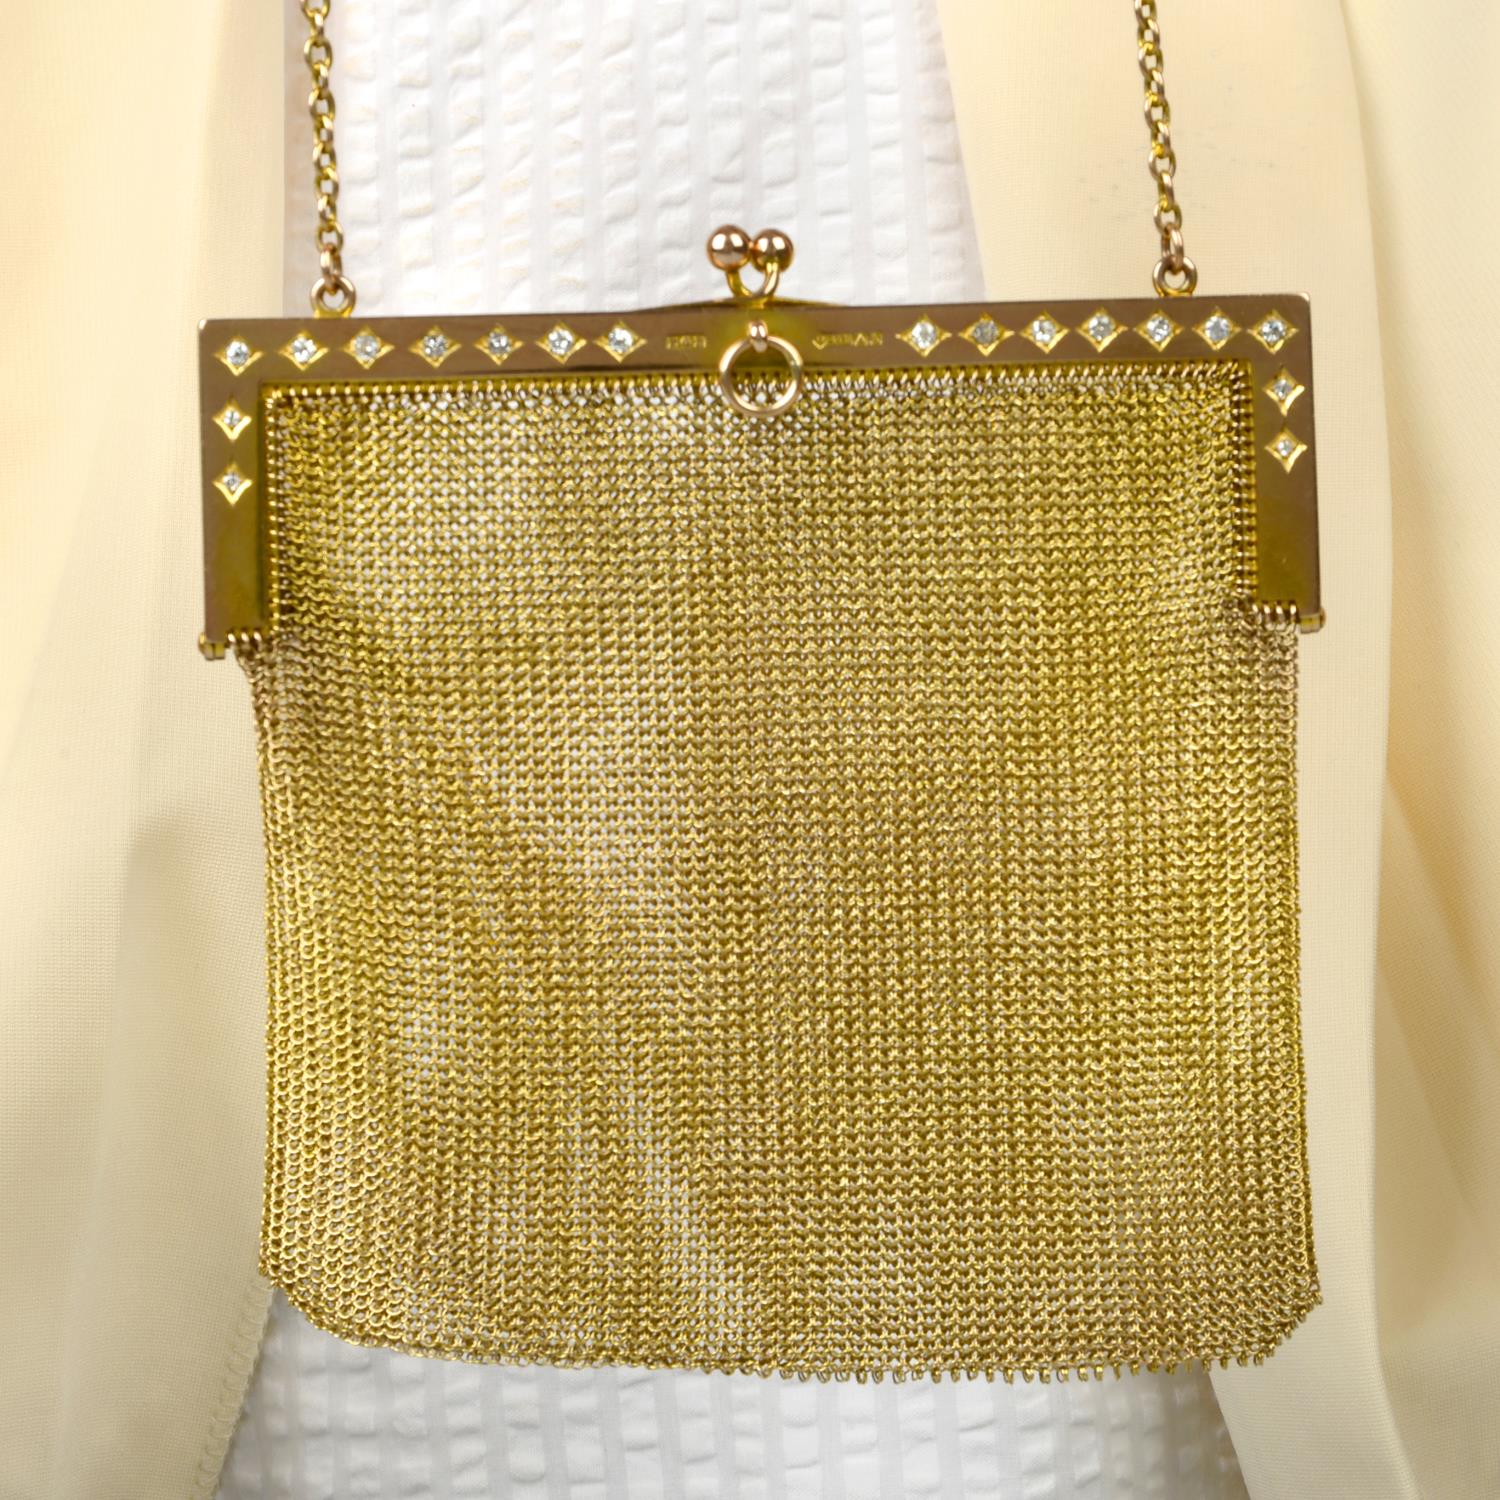 An Edwardian 9ct gold mesh-link purse, with old-cut diamond highlights. - Image 2 of 4